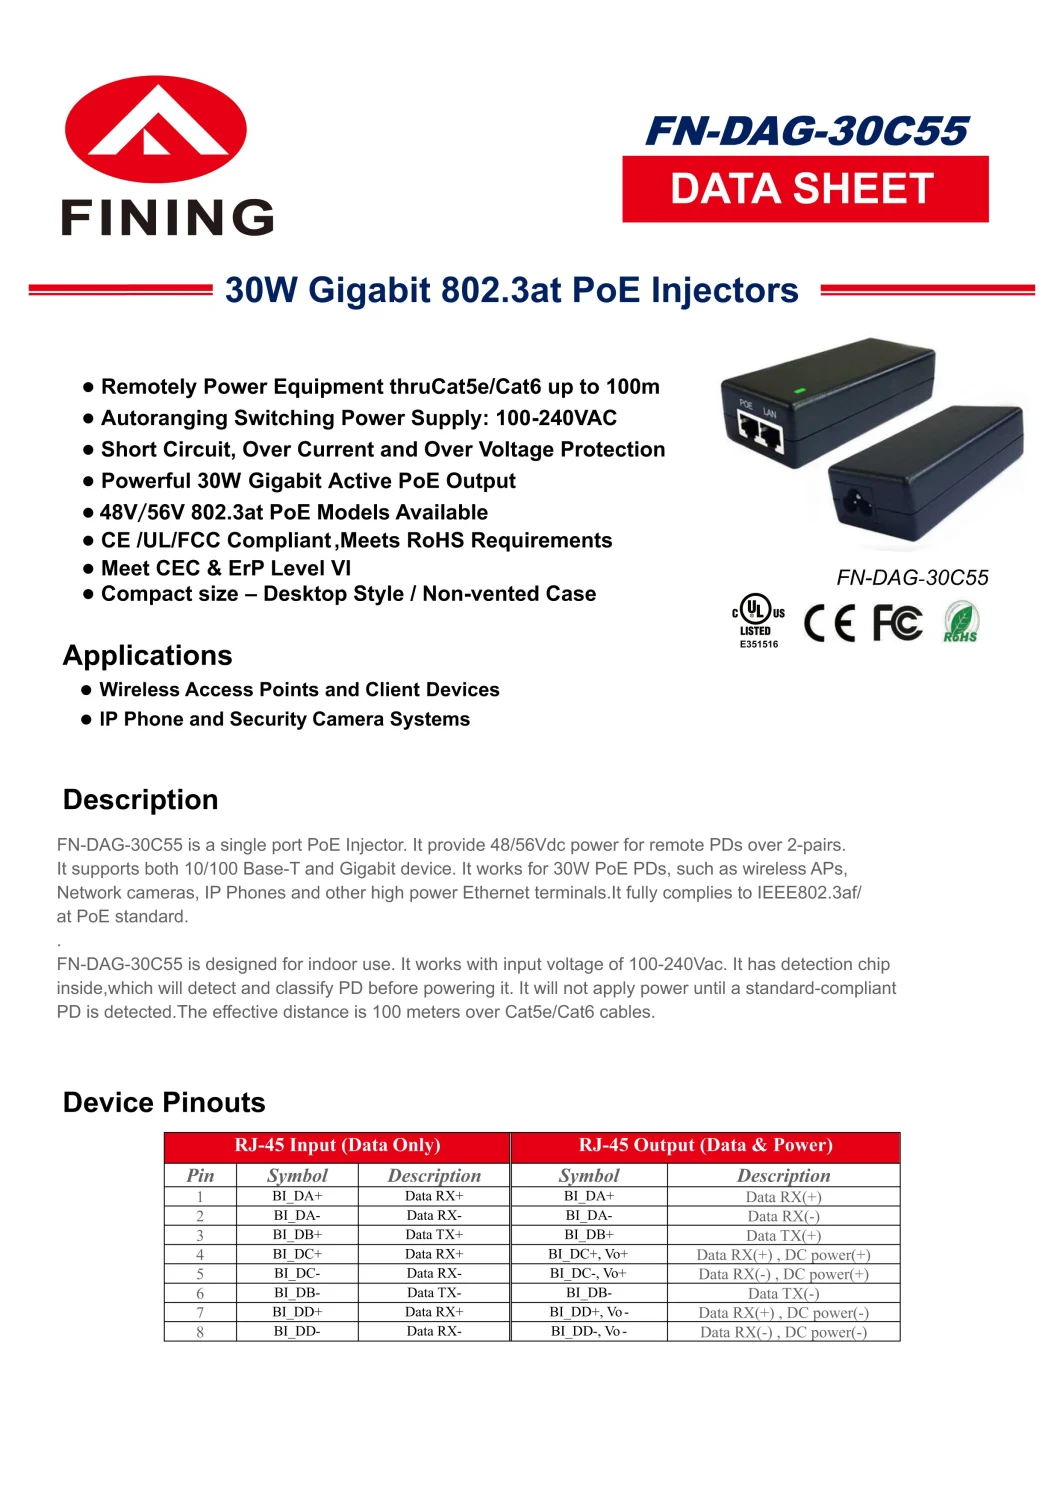 48V700mA/ 56V540mA /30W IEEE802.3at Gigabit Poe Injector for Poe Wireless Devices and Security Cameras